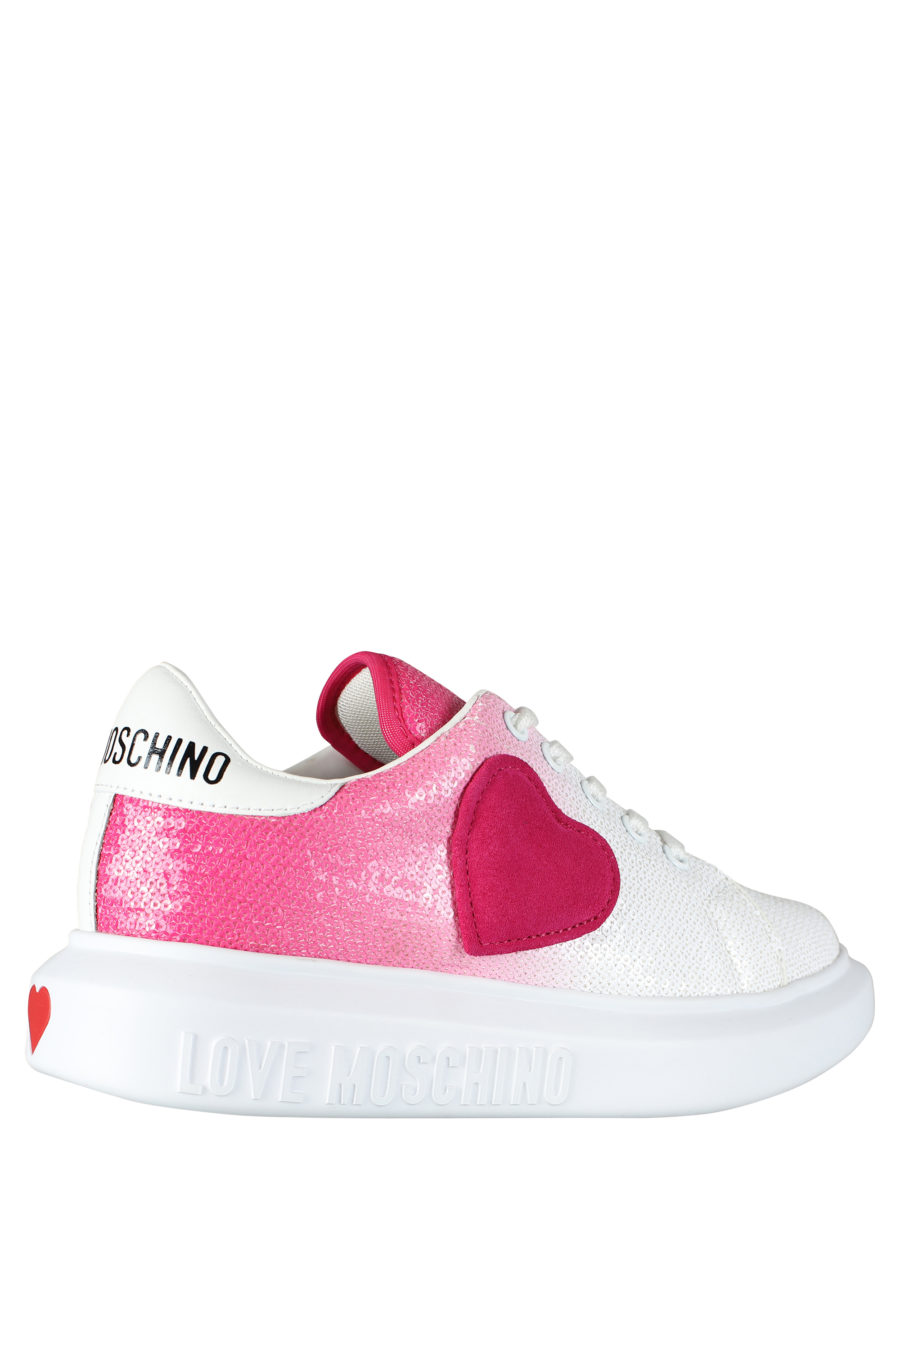 White trainers with pink gradient and sequins - IMG 5262